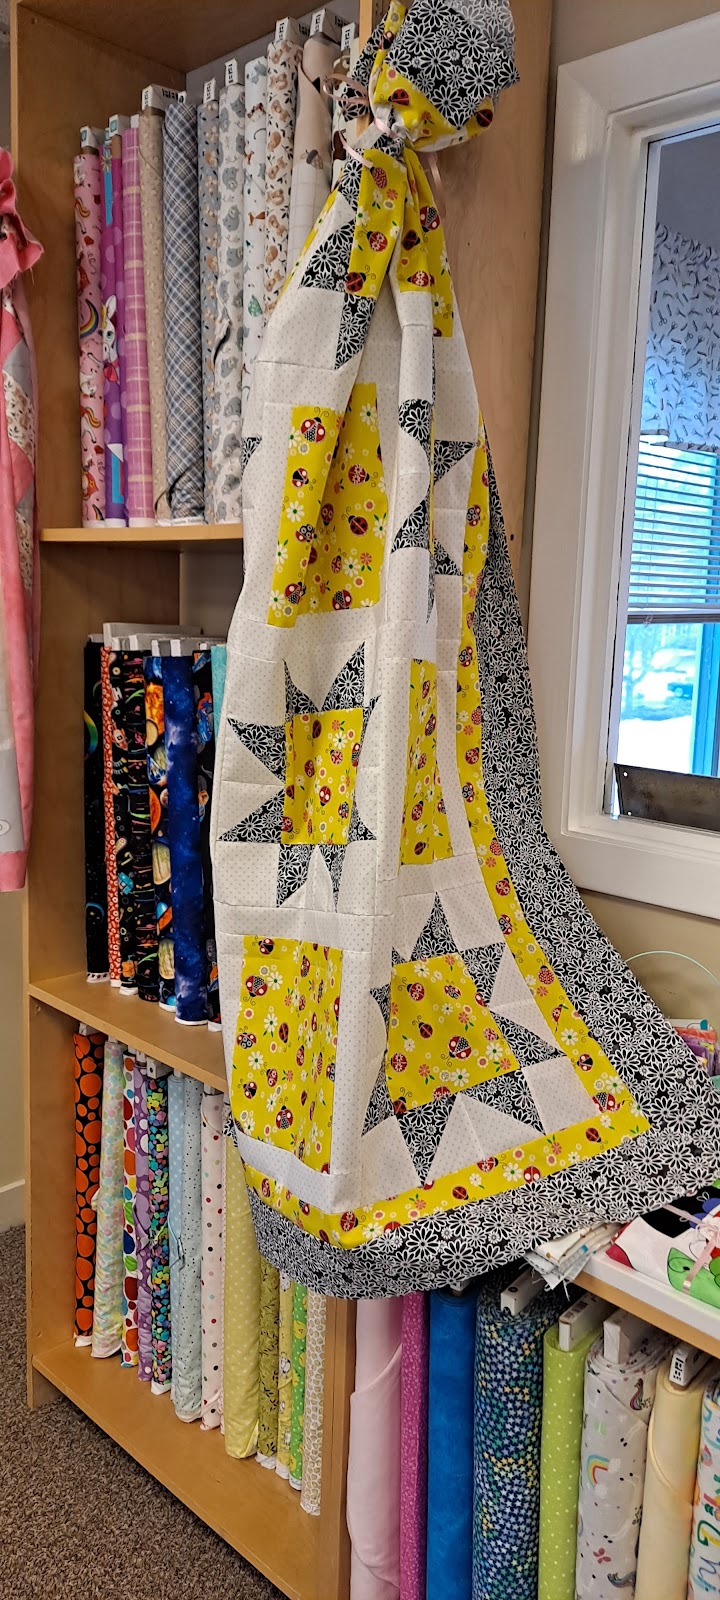 The Sewing Diva Quilt & Gift Shop | 15 Ermer Rd Unit 202, Salem, NH 03079 | Phone: (603) 460-5970